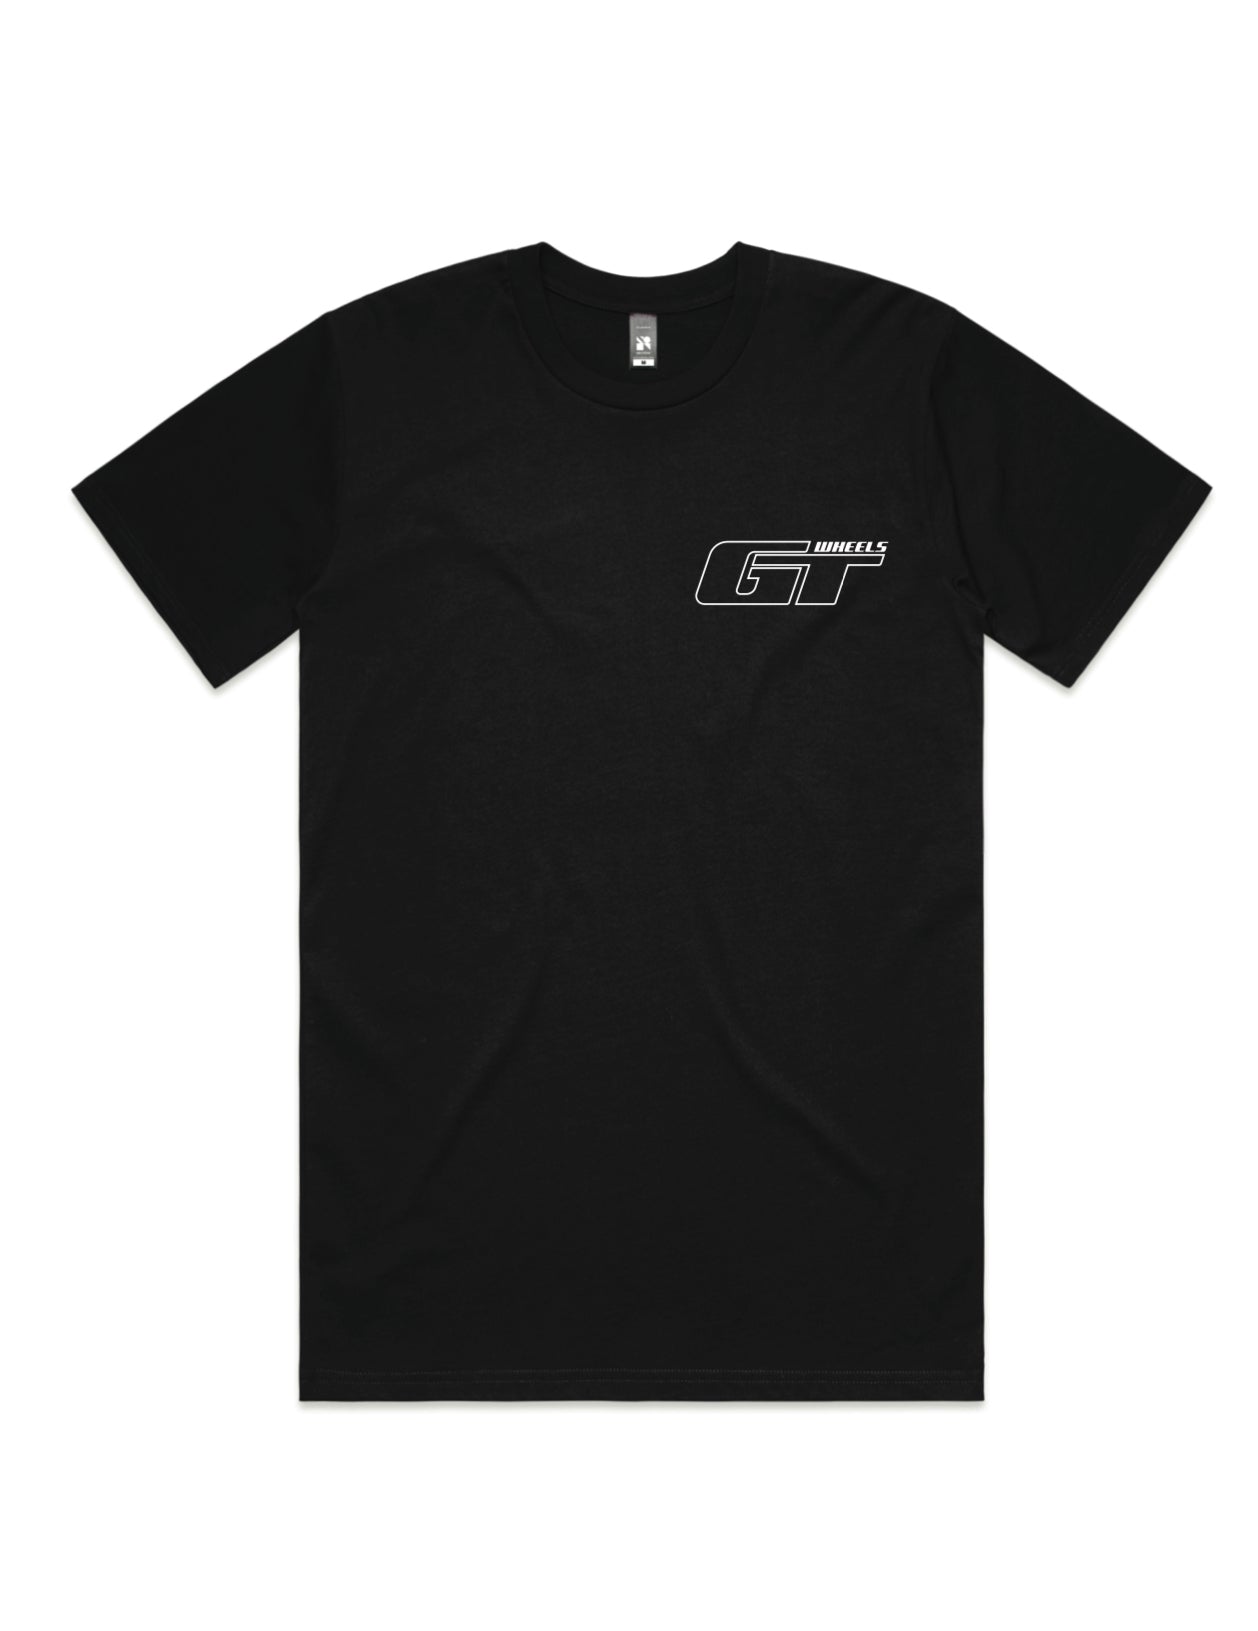 GT Exploded View T Shirt